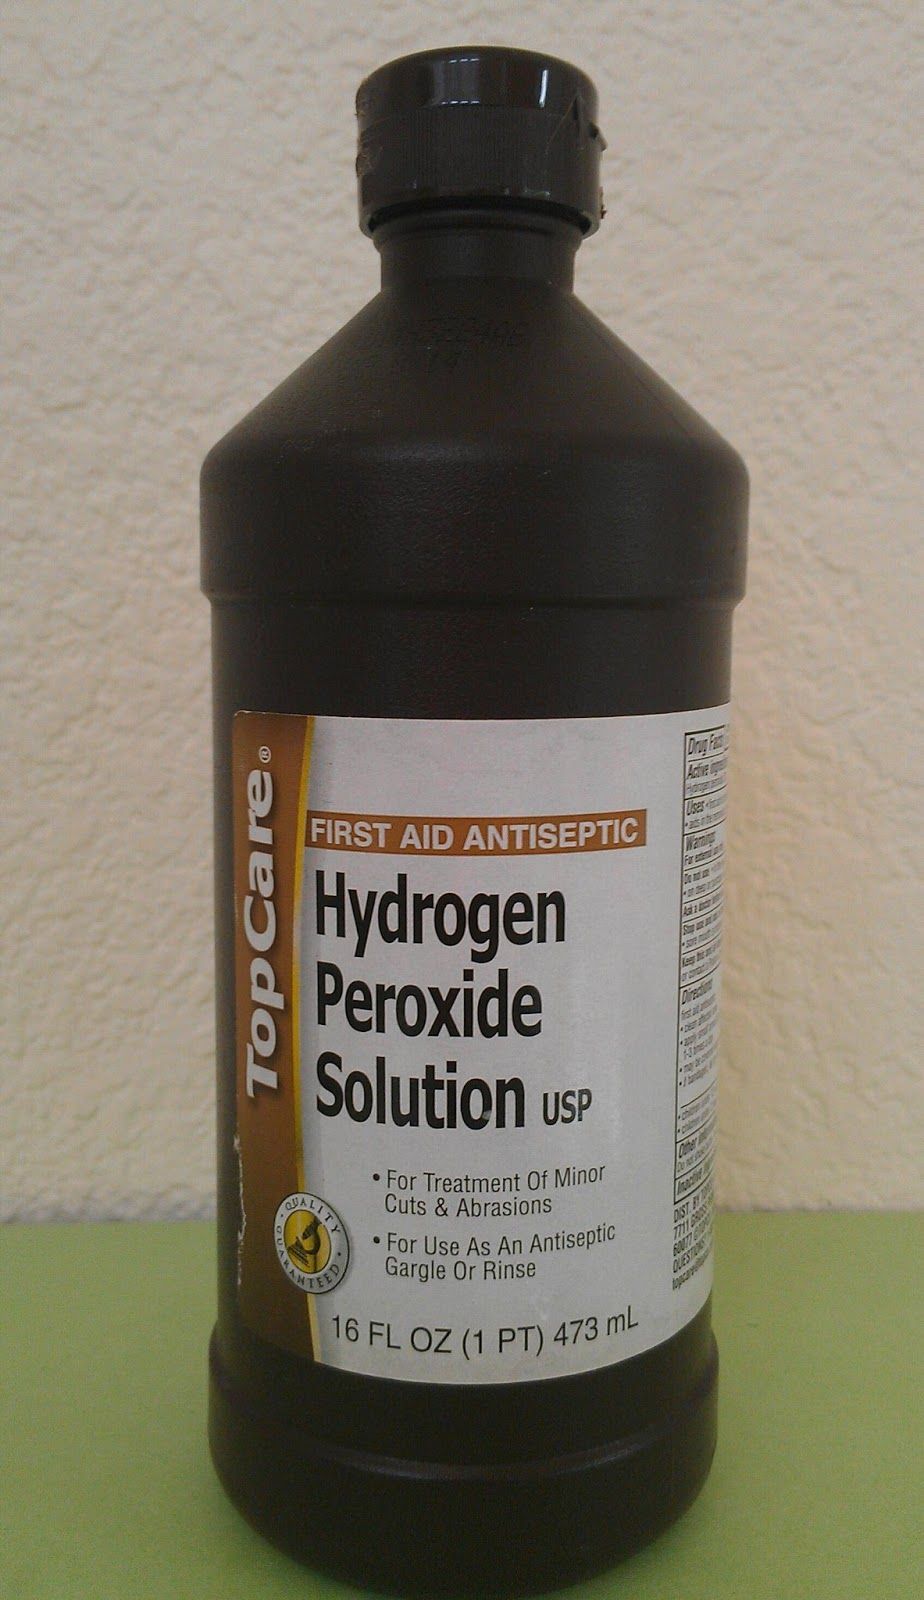 kill ants with hydrogen peroxide